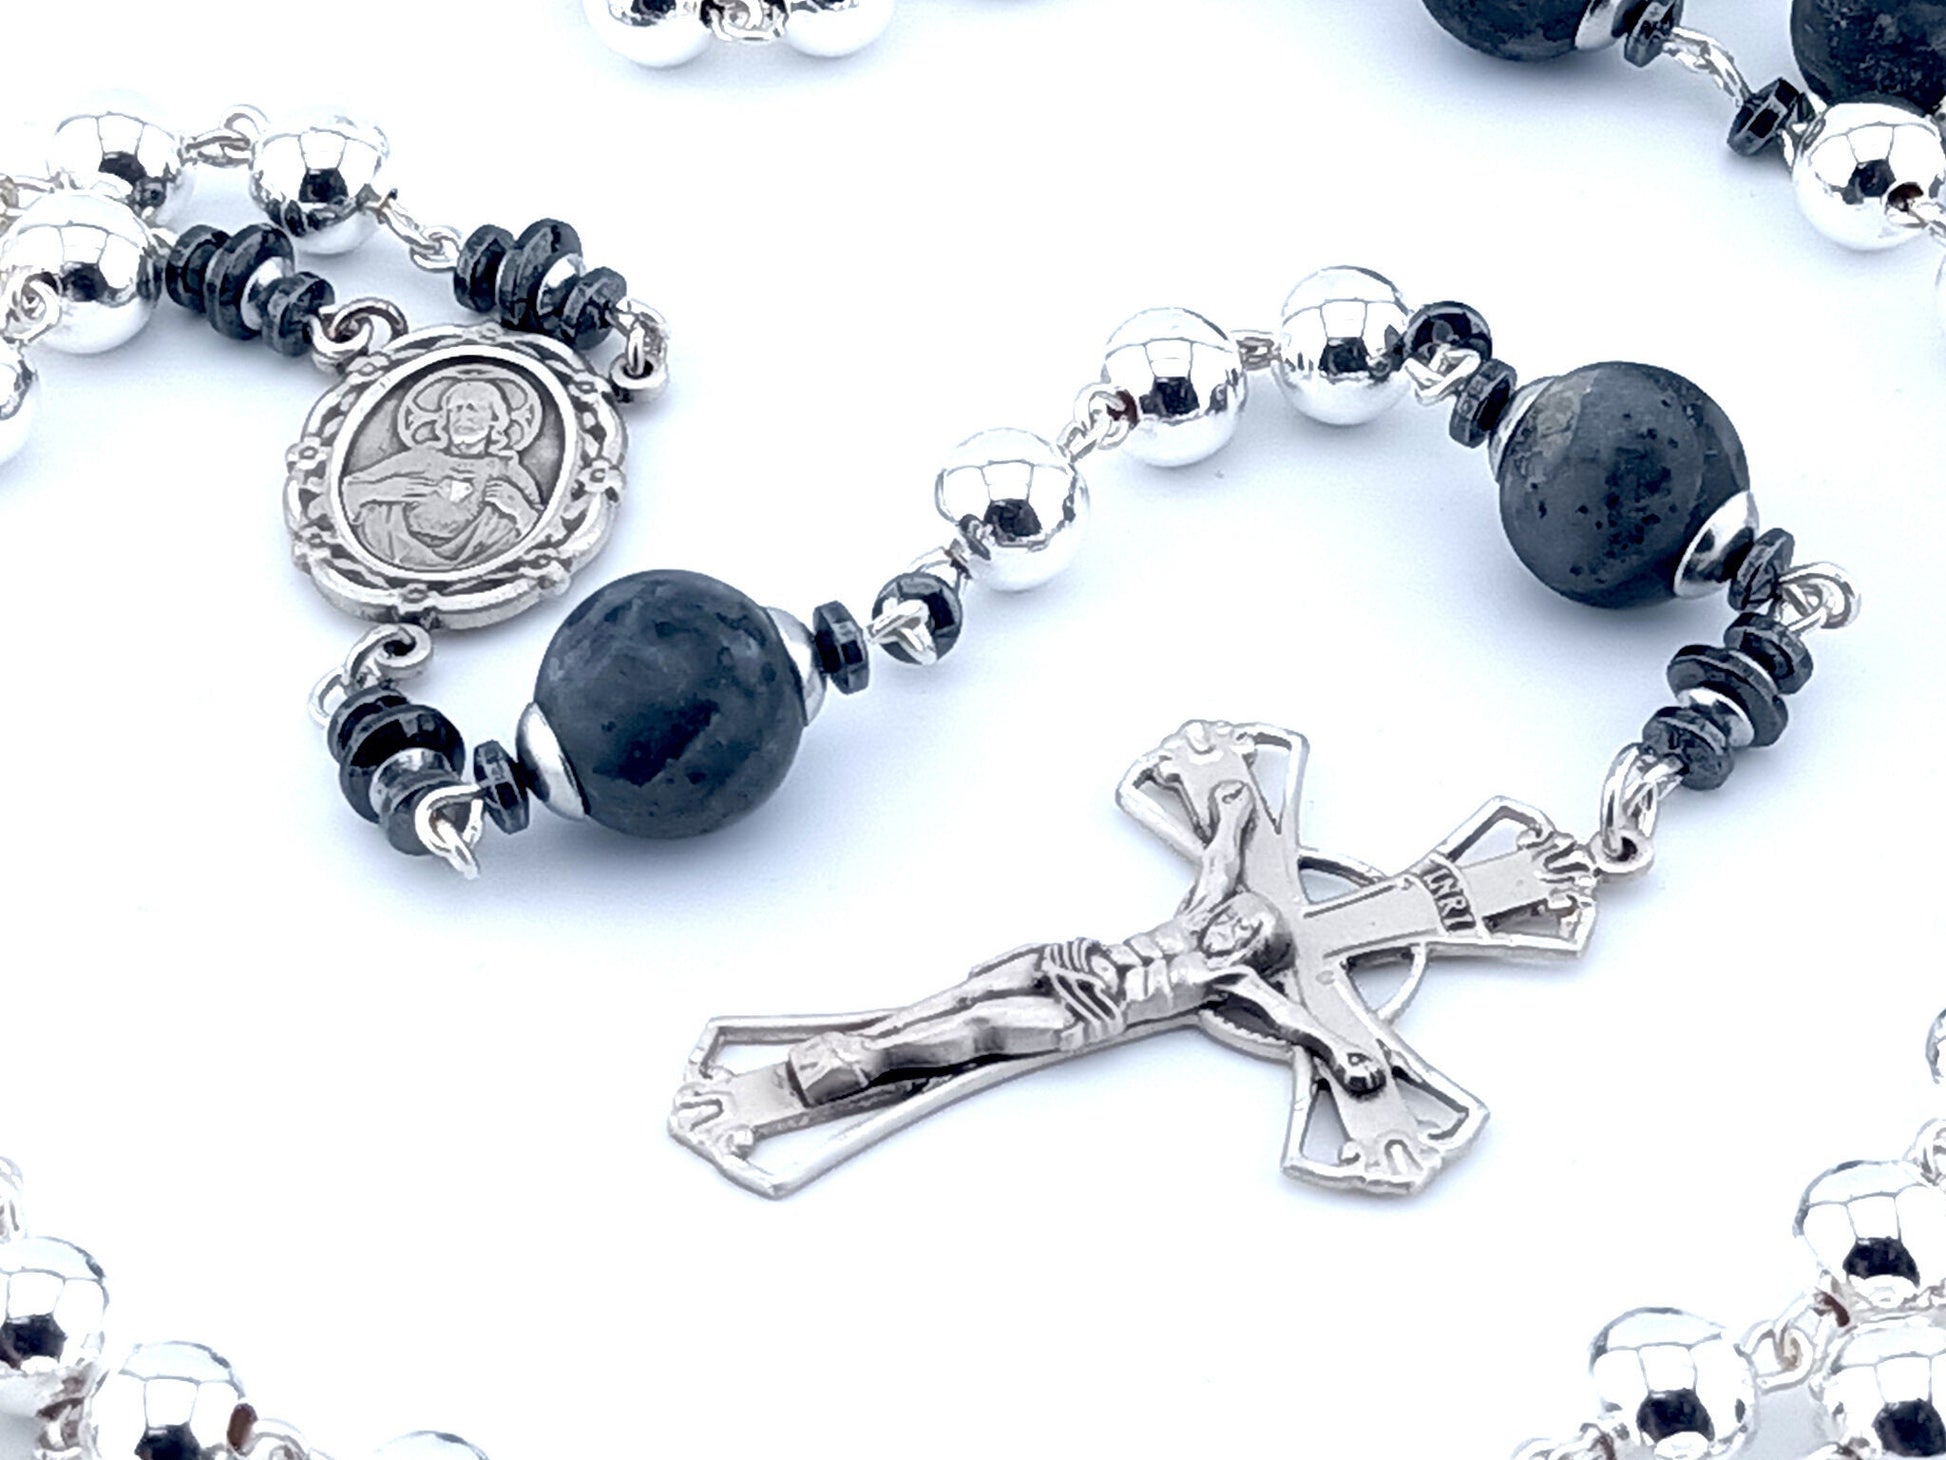 Sacred Heart of Jesus unique rosary beads with genuine 925 silver beads, wire, centre medal and crucifix.